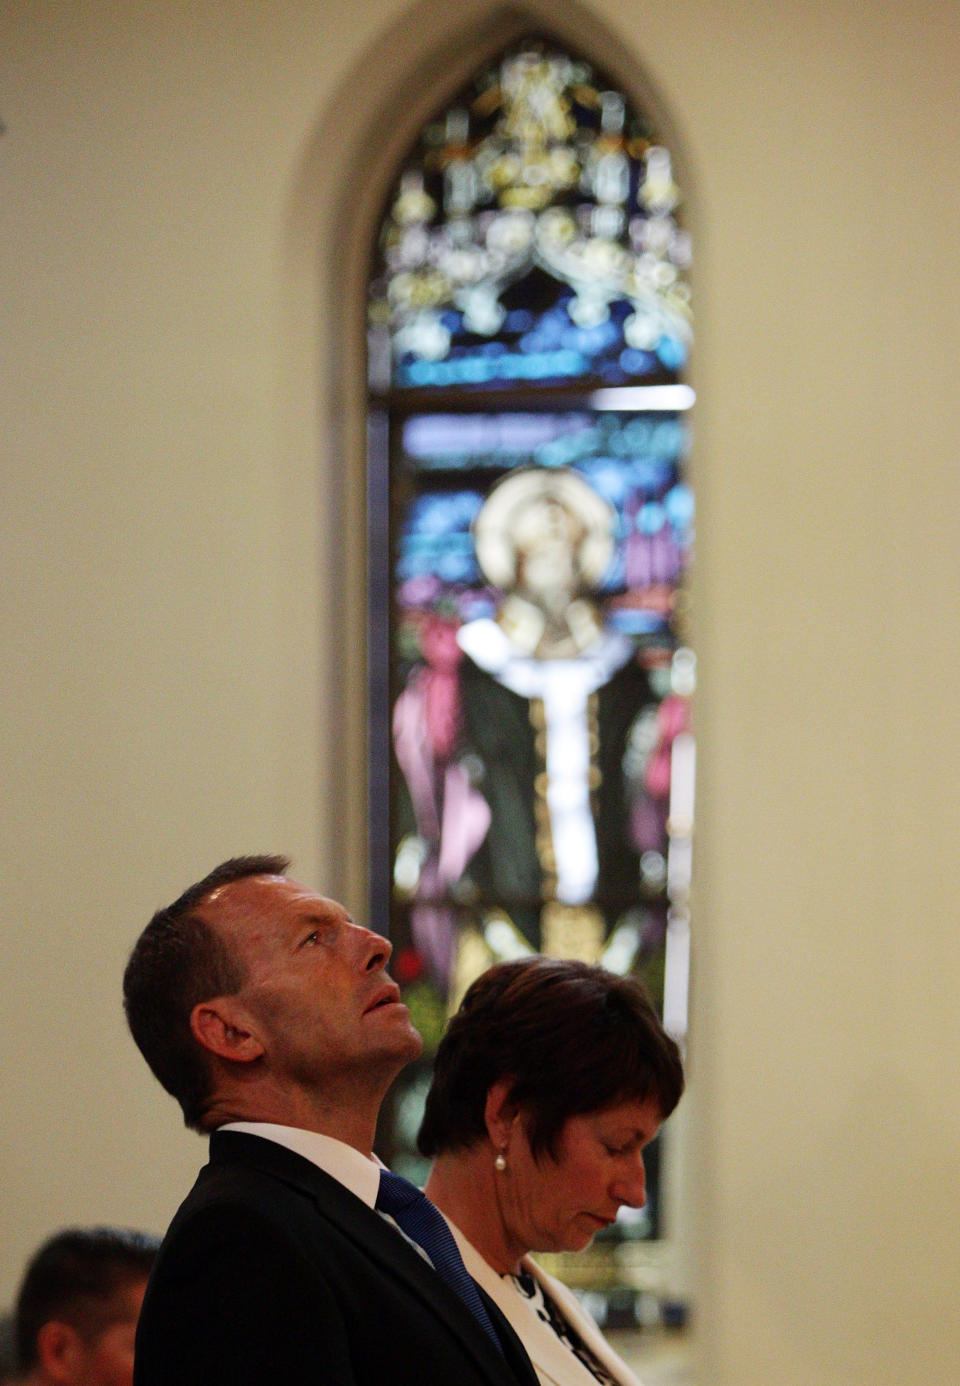 In his 20s, Tony Abbott trained to become a Catholic priest at Australia’s leading St. Patrick’s Seminary, but quit after three years. He is also a former boxer and the 56-year-old politician’s aggressive style of politics and religious past earned him the nickname <a href="http://www.theweek.co.uk/world-news/54924/who-tony-abbott-mad-monk-elected-aussie-pm#ixzz2tJZ8rtQP" target=_blank">“The Mad Monk.”</a>  <br> <br> Abbott has championed socially conservative policies and his all-male-but-one cabinet led <a href="http://www.abc.net.au/news/2013-09-16/crabb-a-ministry-of-merit-conspicuously-lacking-in-women/4960902"target="_blank">one Australian journalist to quip: </a>“It is 26 years since Tony Abbott left the seminary, but in many ways he takes it wherever he goes.” <br> <br> <em>Tony Abbott attends a chapel vigil on October 17, 2010 in Sydney, Australia. (Craig Golding/Getty Images)</em>